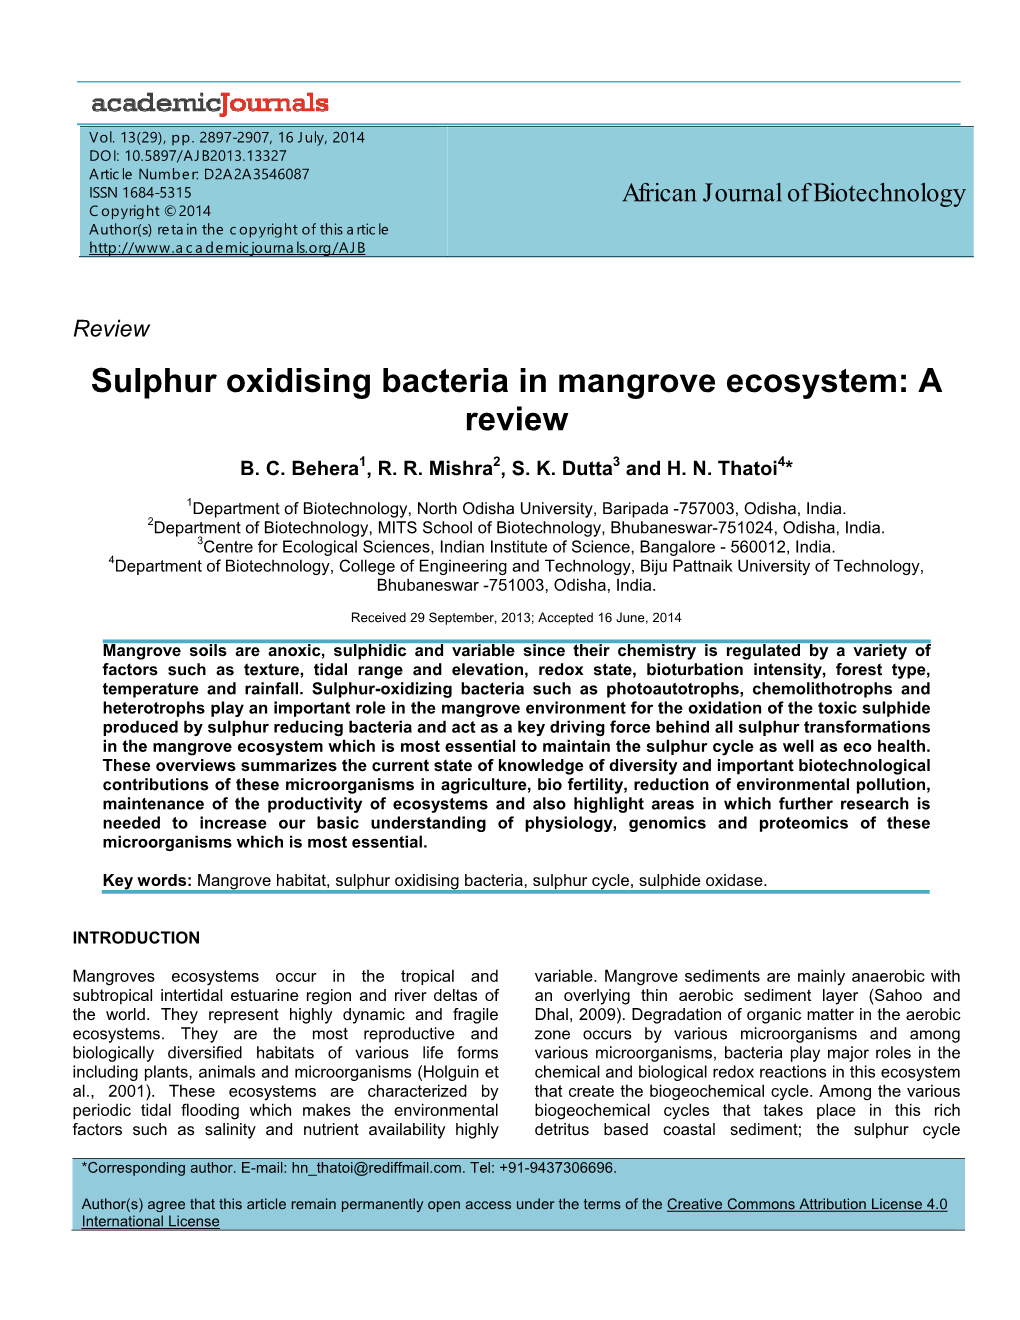 Sulphur Oxidising Bacteria in Mangrove Ecosystem: a Review